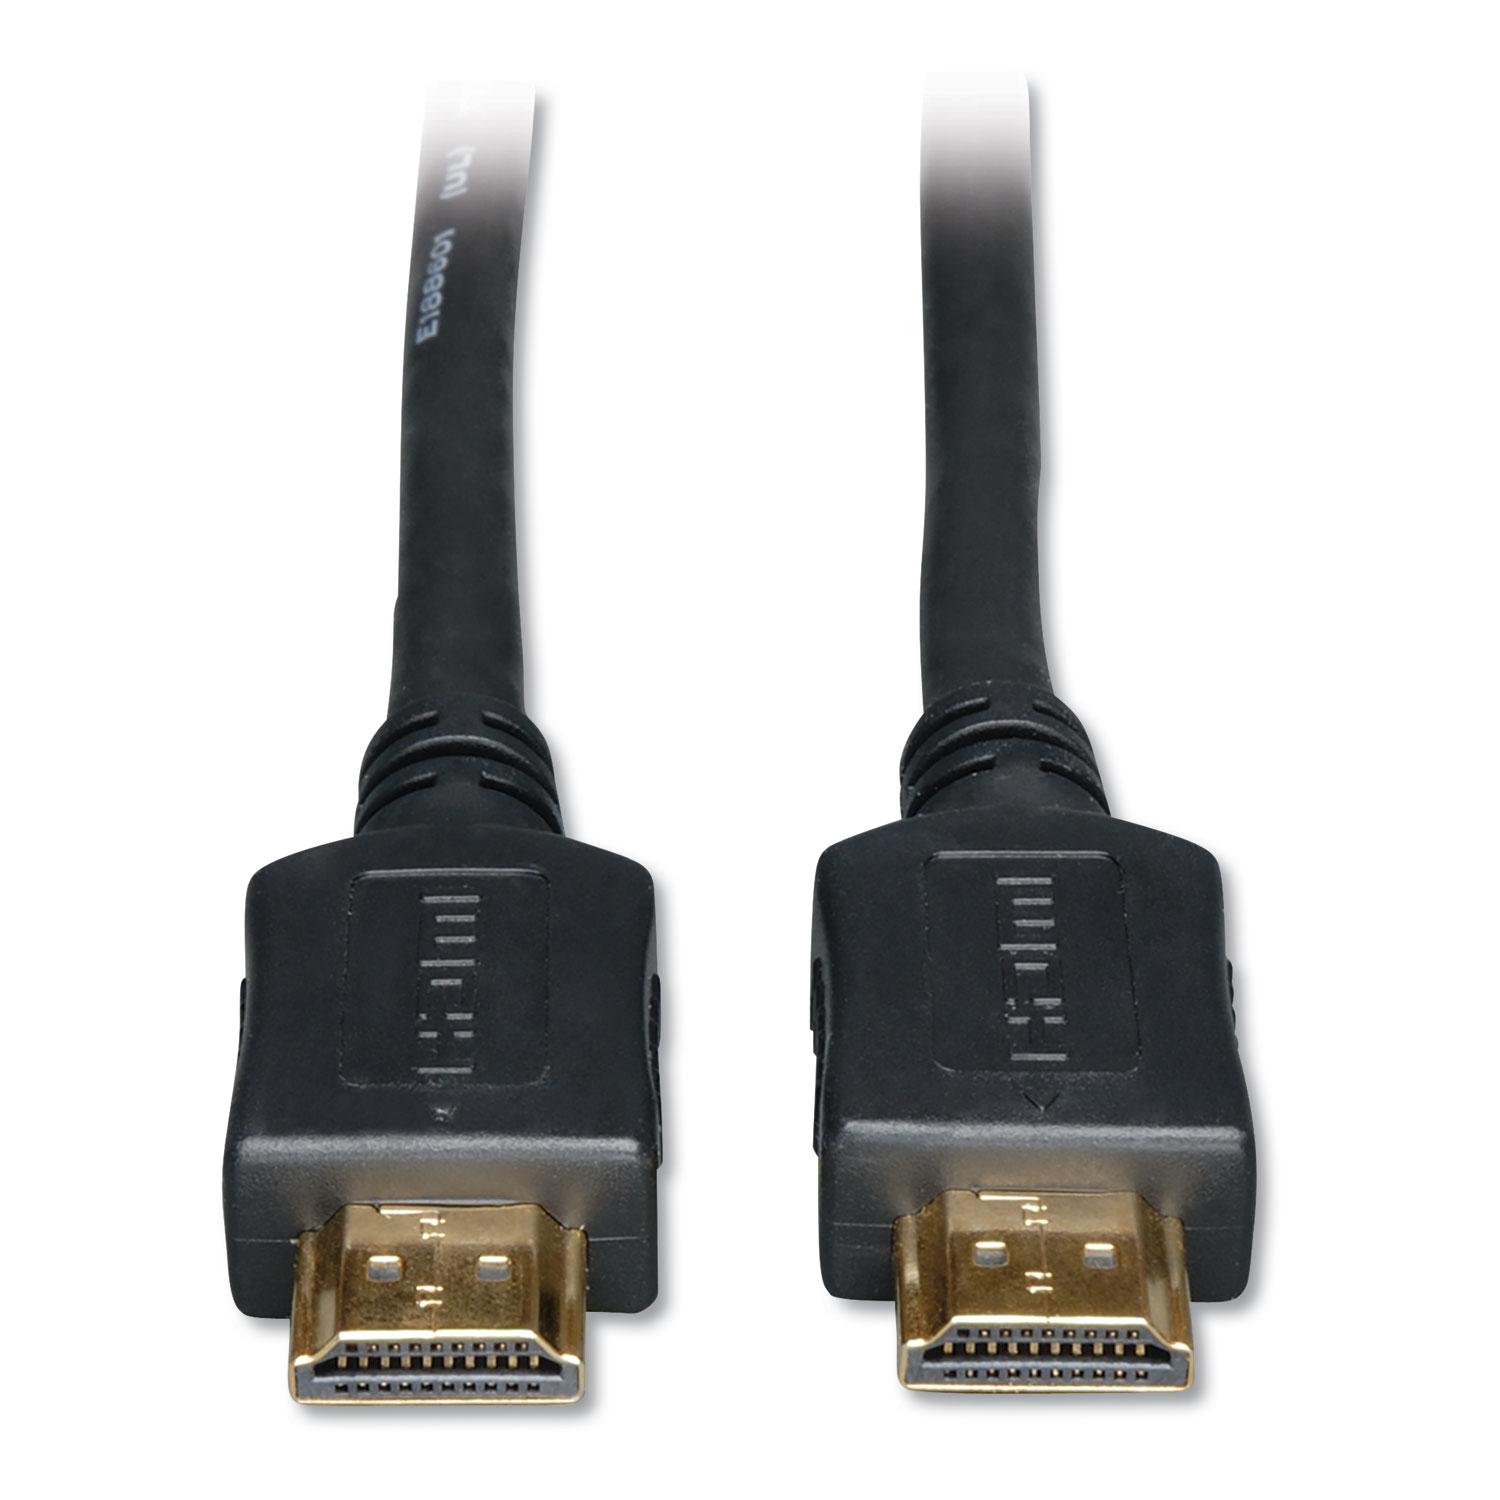  Tripp Lite P568-030 High Speed HDMI Cable, Ultra HD 4K, Digital Video with Audio (M/M), 30 ft. (TRPP568030) 